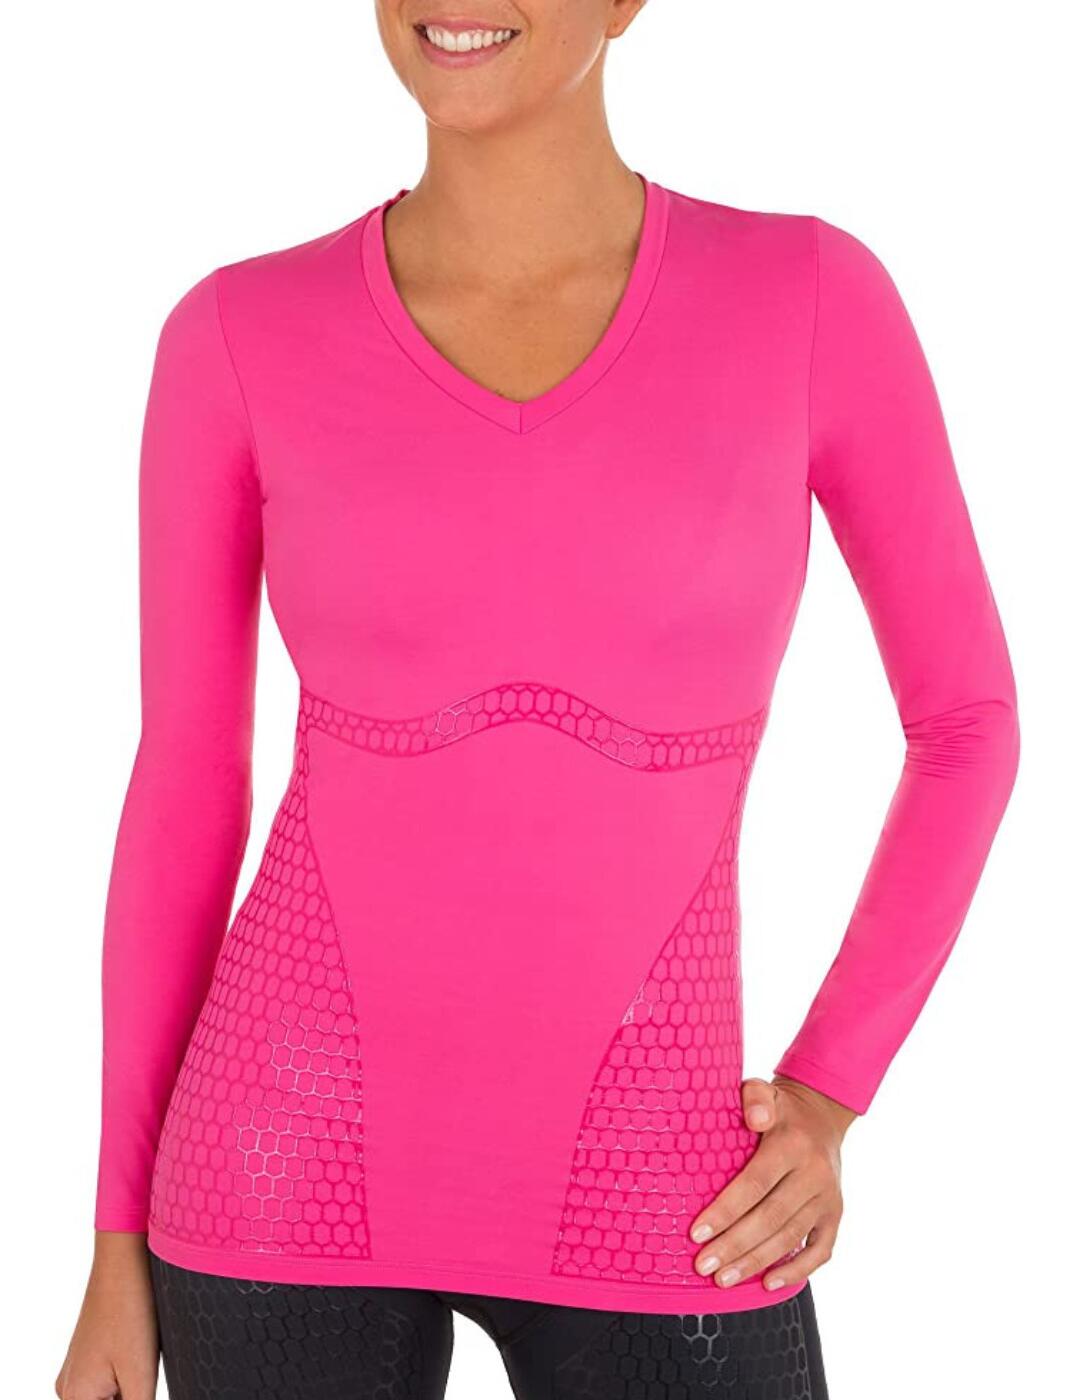 Shock Absorber Ultimate Body Support Long Sleeved Sports Top Pink